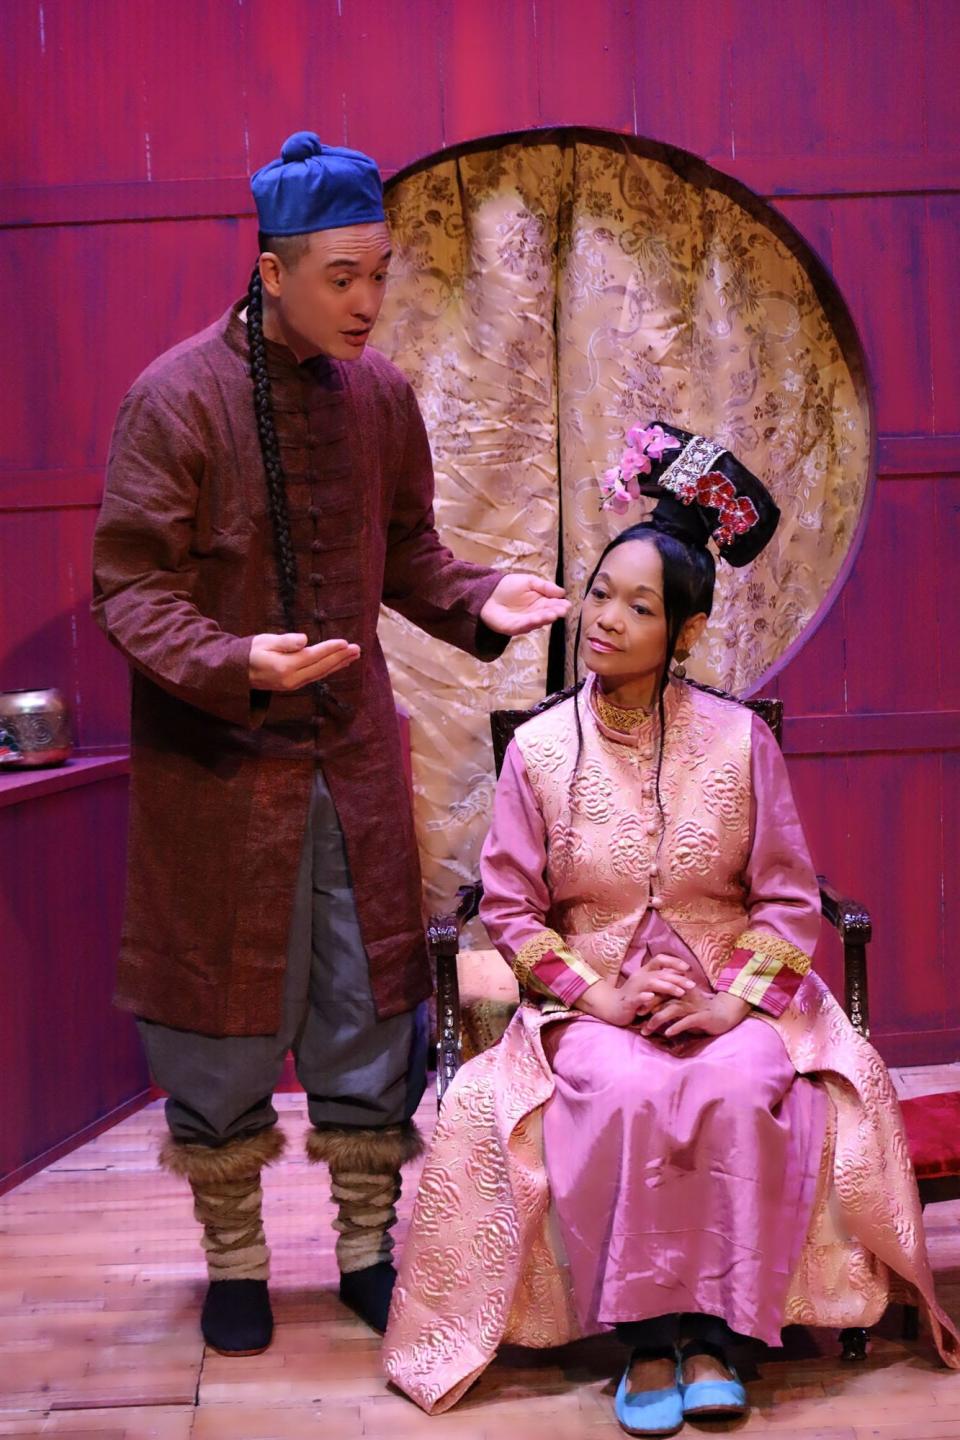 Chad Hsu and Mirla Criste star in "The Chinese Lady" at Thalian Hall's studio theater, June 8-18.